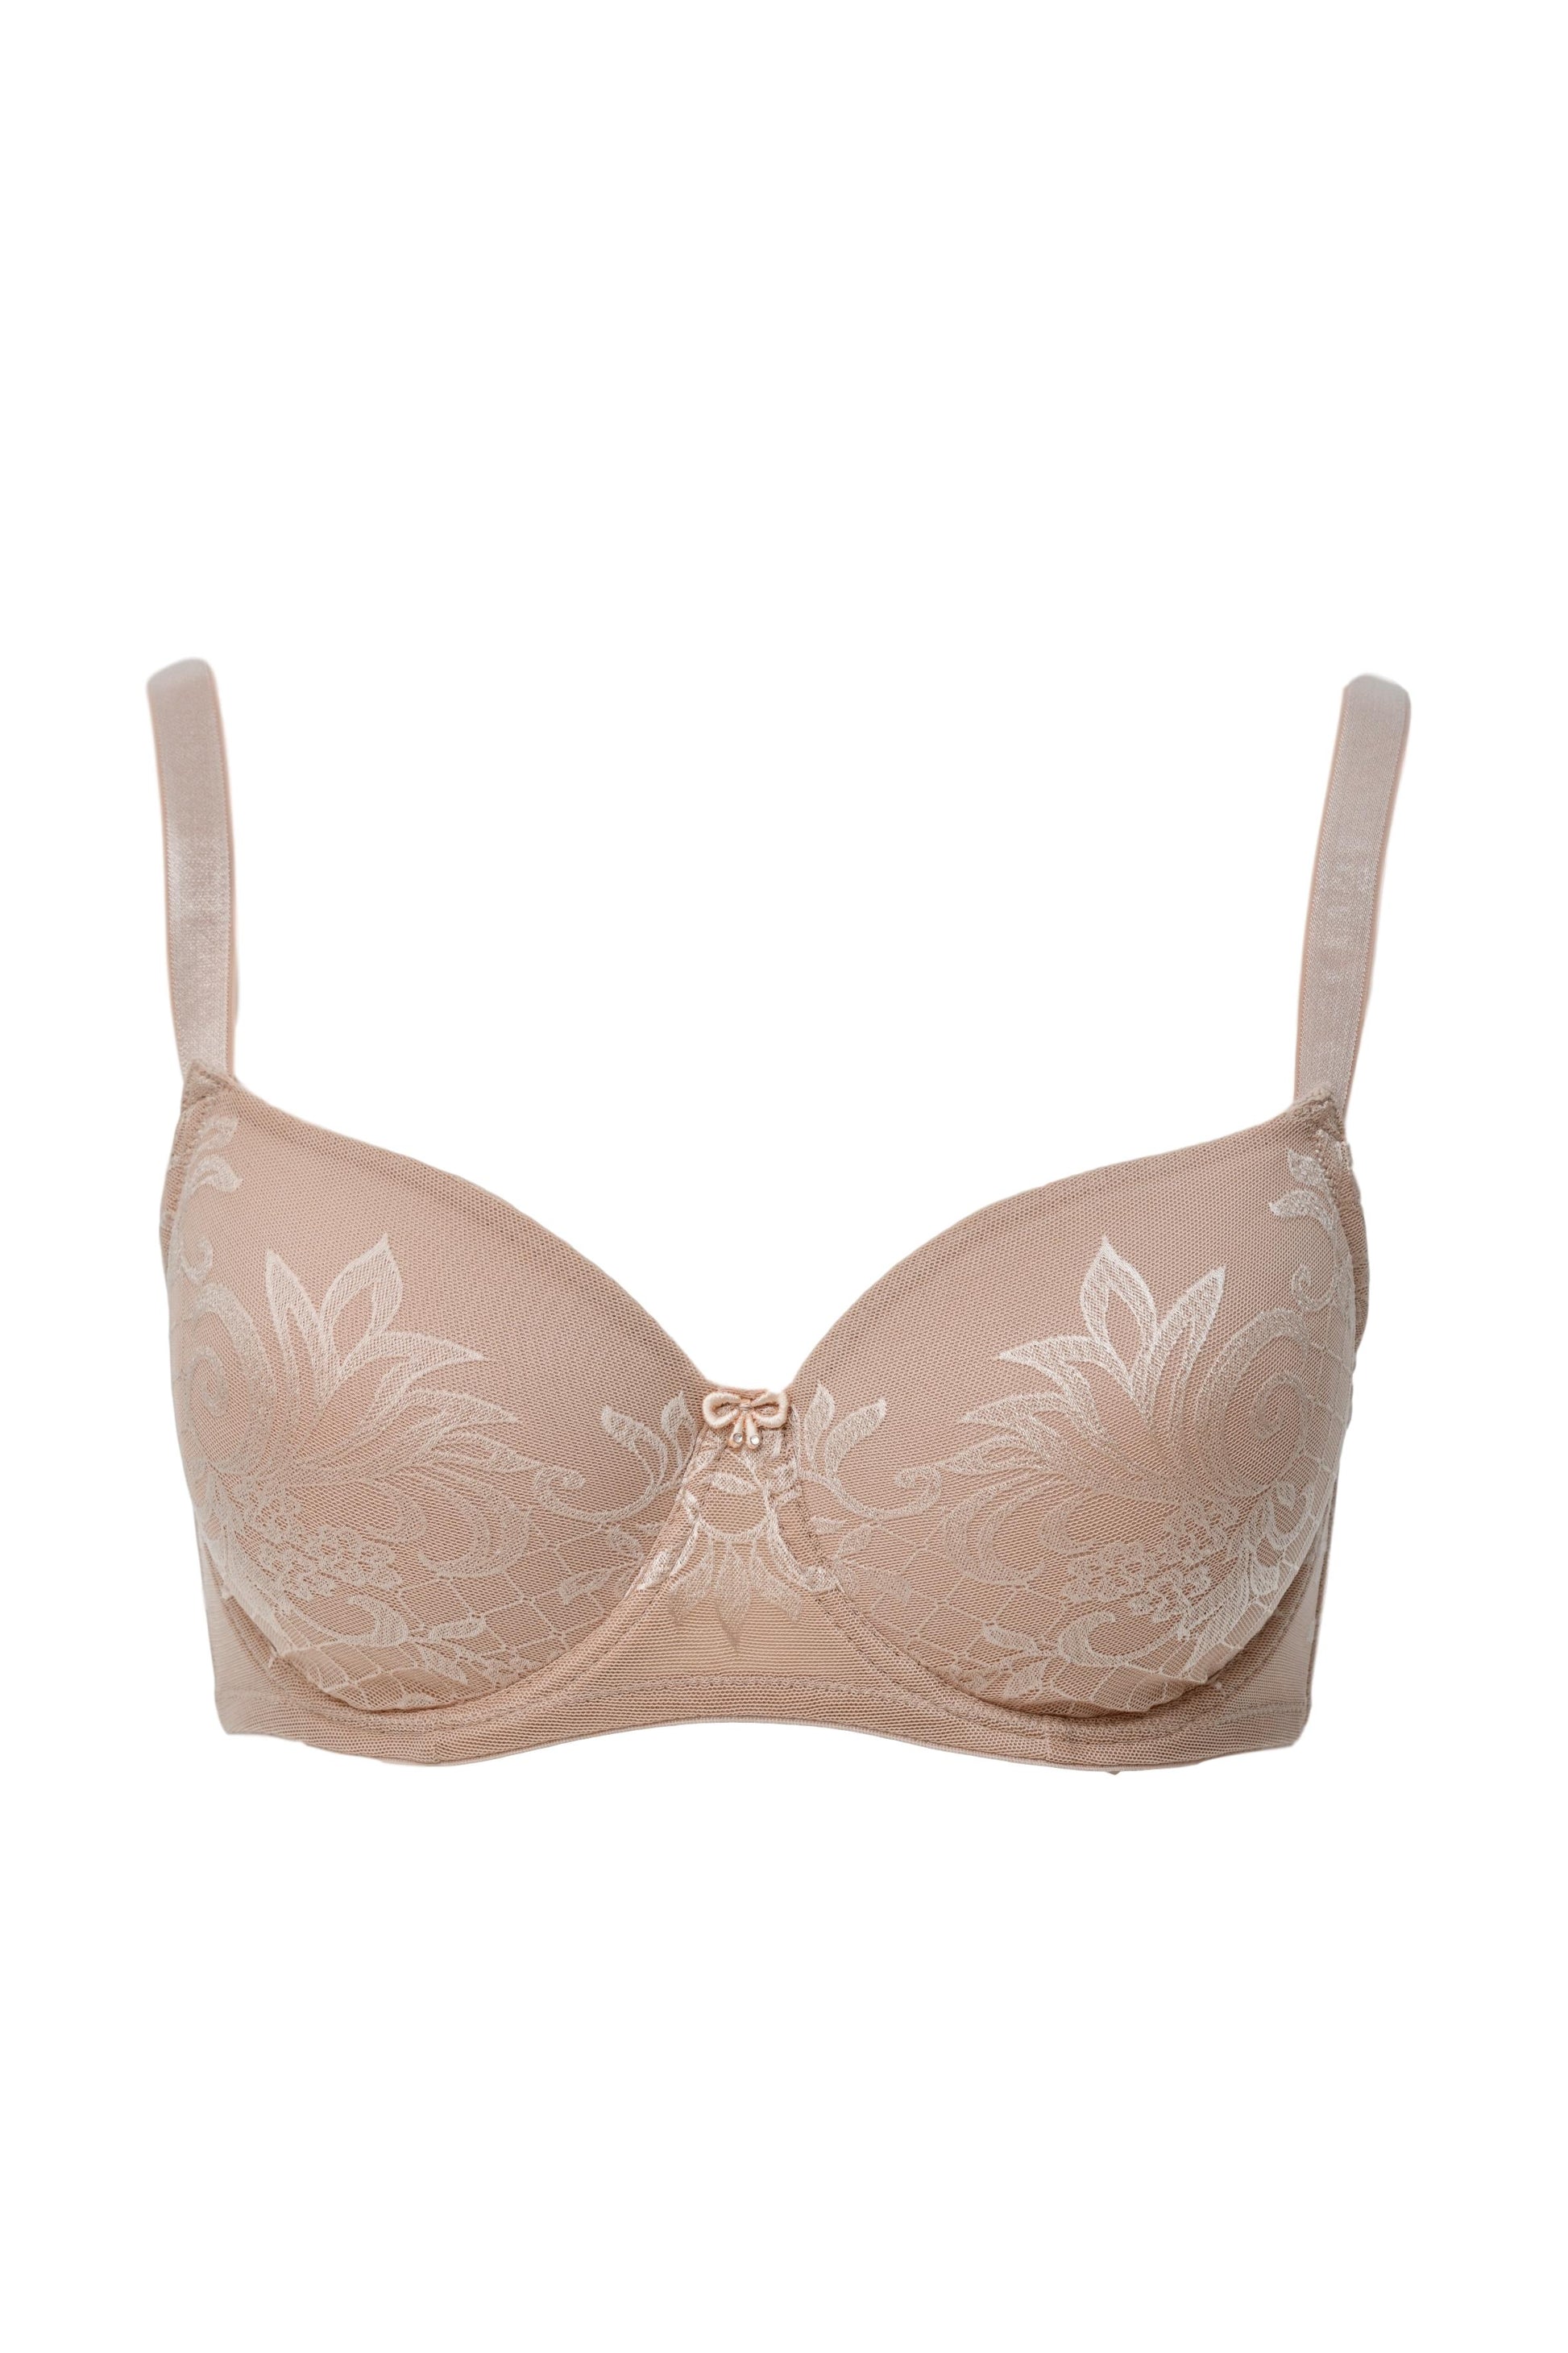 This spacer bra from the Free line by Leilieve of Italy is crafted from a soft, elastic Jacquard fabric with a unique blend of floral and geometric patterns. The cup has been constructed from a 3D-knitted spacer fabric, consisting of two layers of thin fabric knitted together with a microfilament yarn. The result is an incredibly breathable inner layer. 